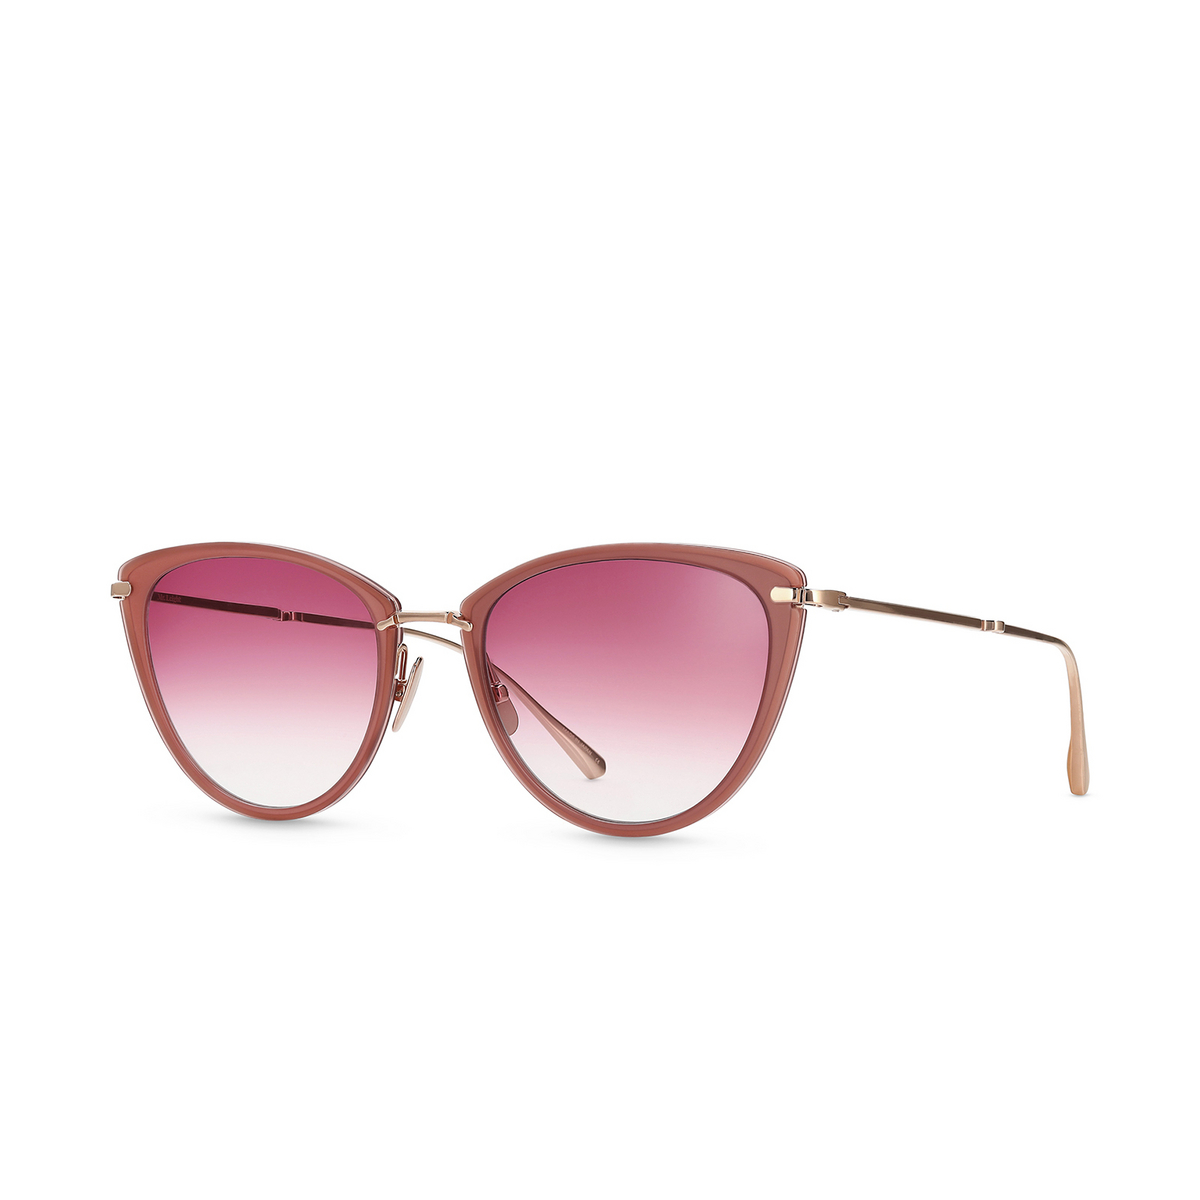 Mr. Leight® Butterfly Sunglasses: Beverly S color RW-18KRG/SG - three-quarters view.